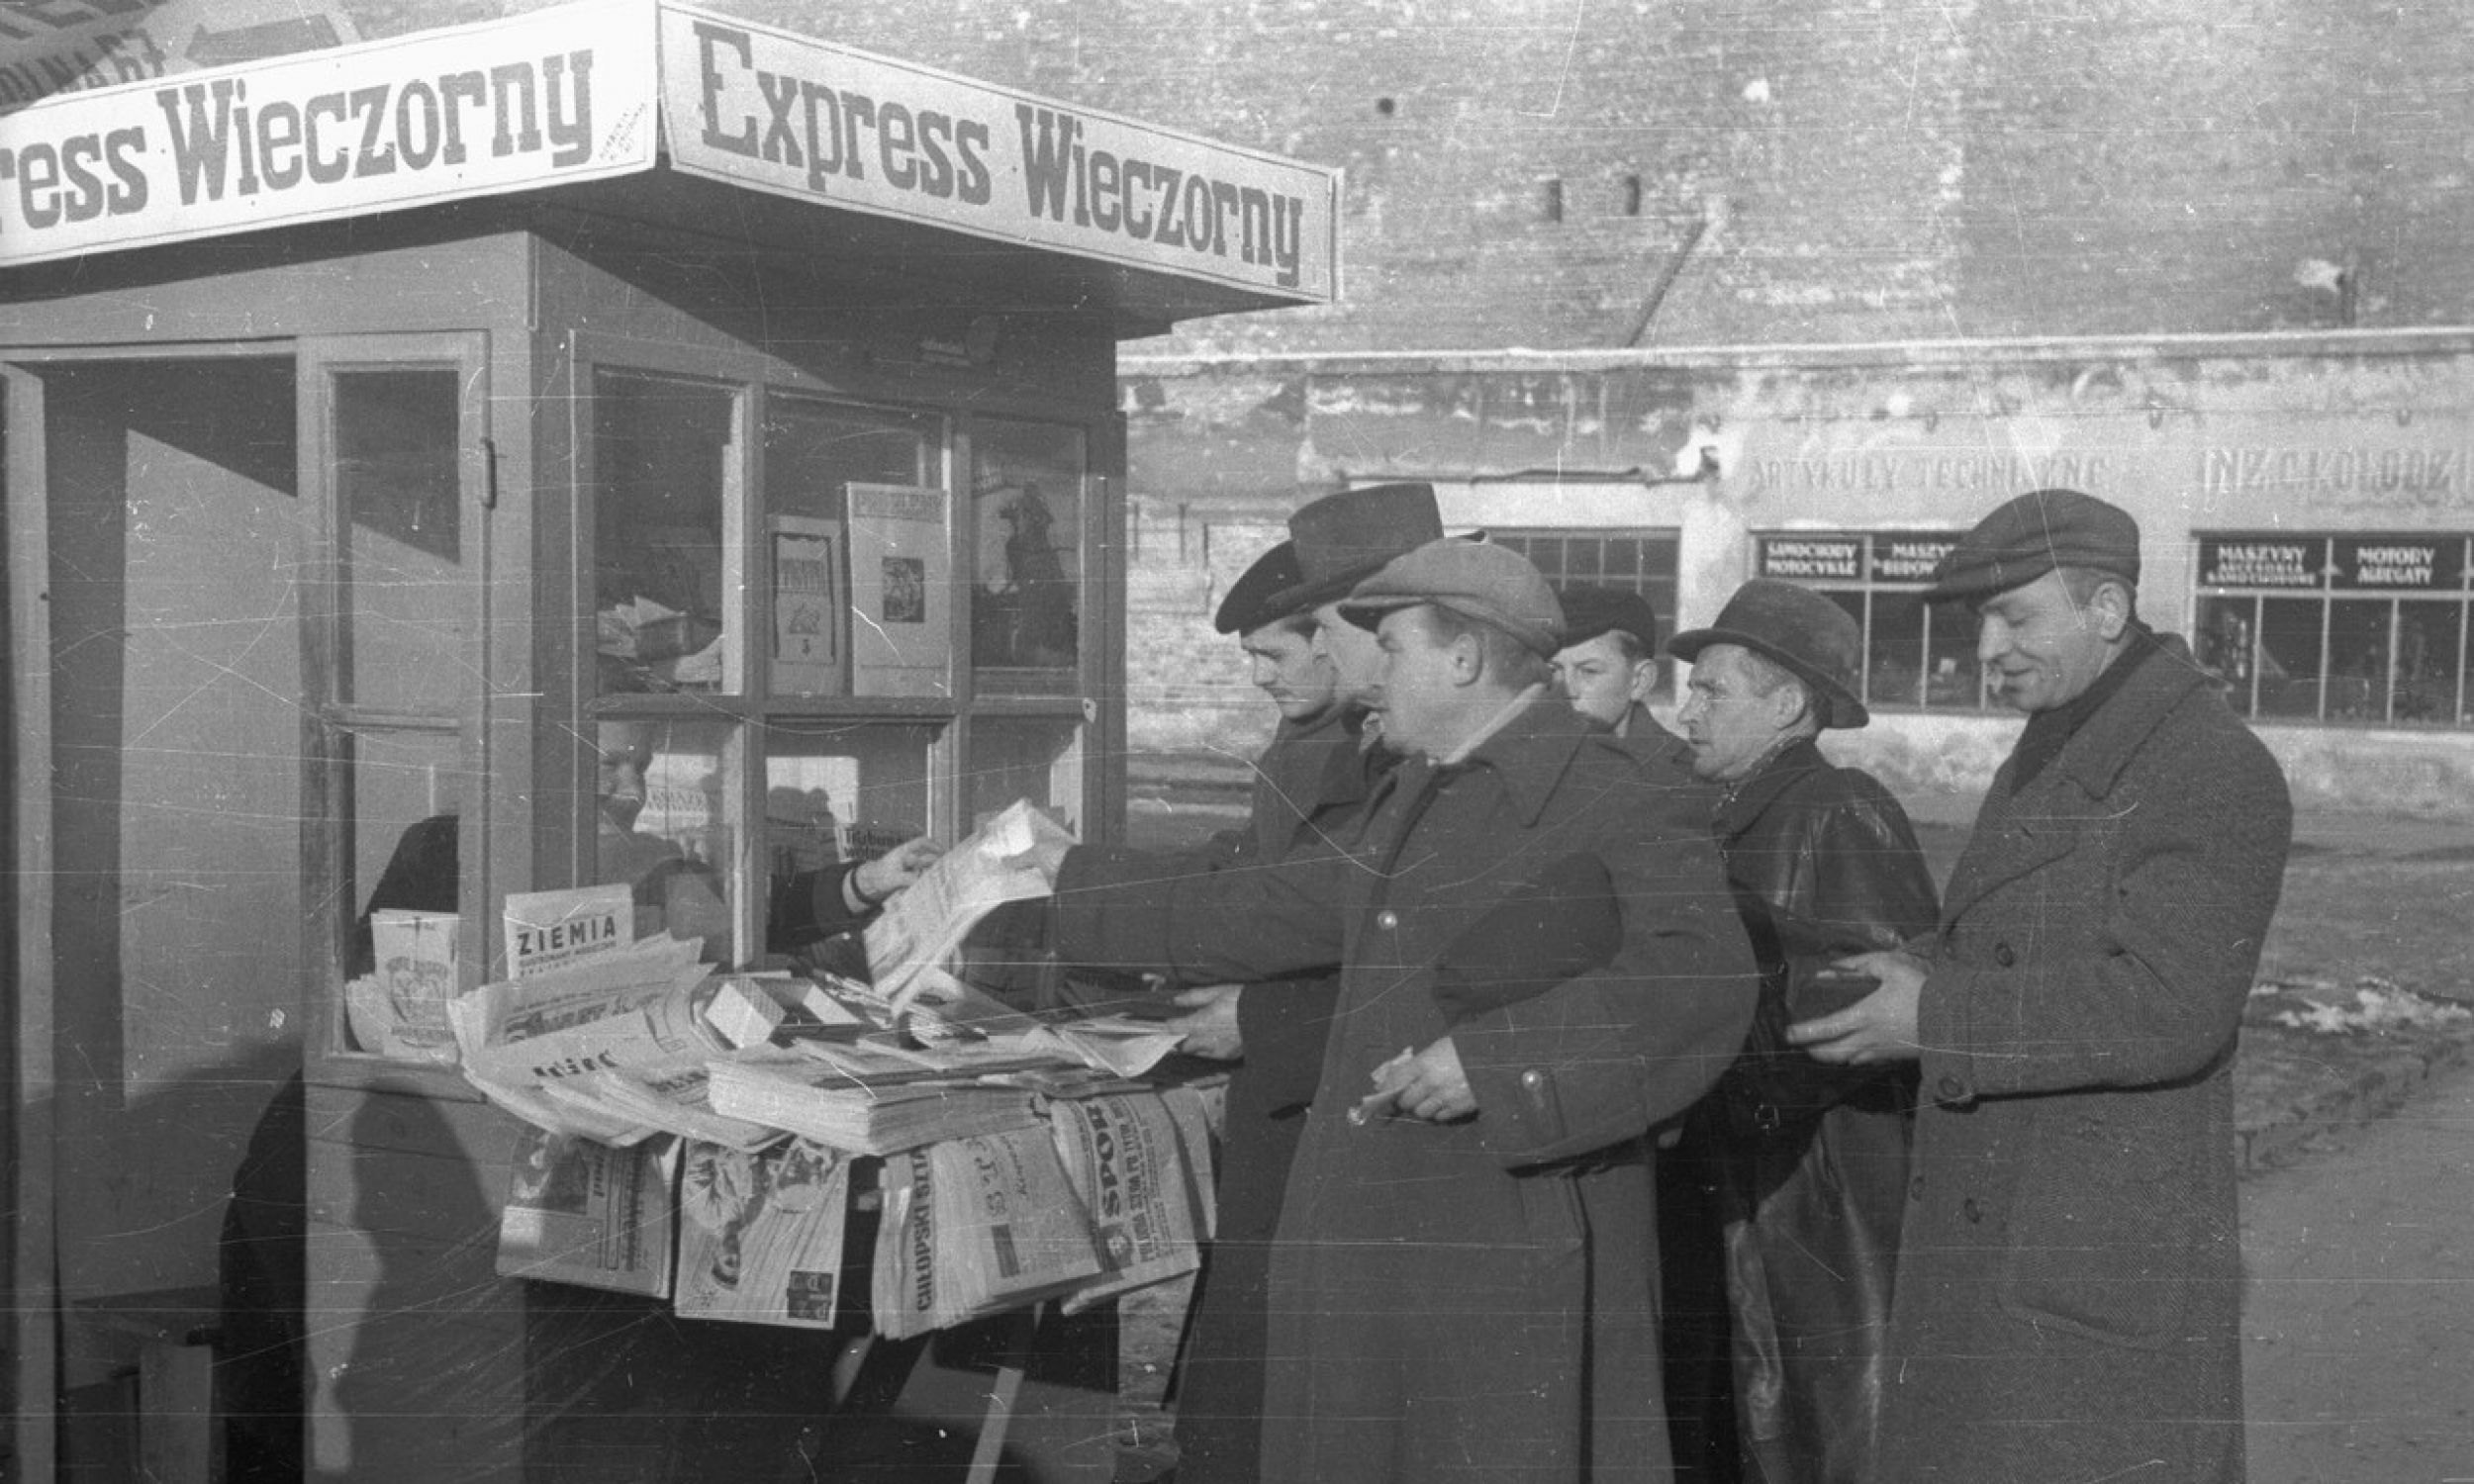 Warsaw in November 1946. In May of that year, “Express Wieczorny” was founded, which until the establishment of the Polish United Workers’ Party in 1948 belonged to the Polish Socialist Party. Pictured is a newspaper kiosk. Photo: PAP / Stanisław Dąbrowiecki